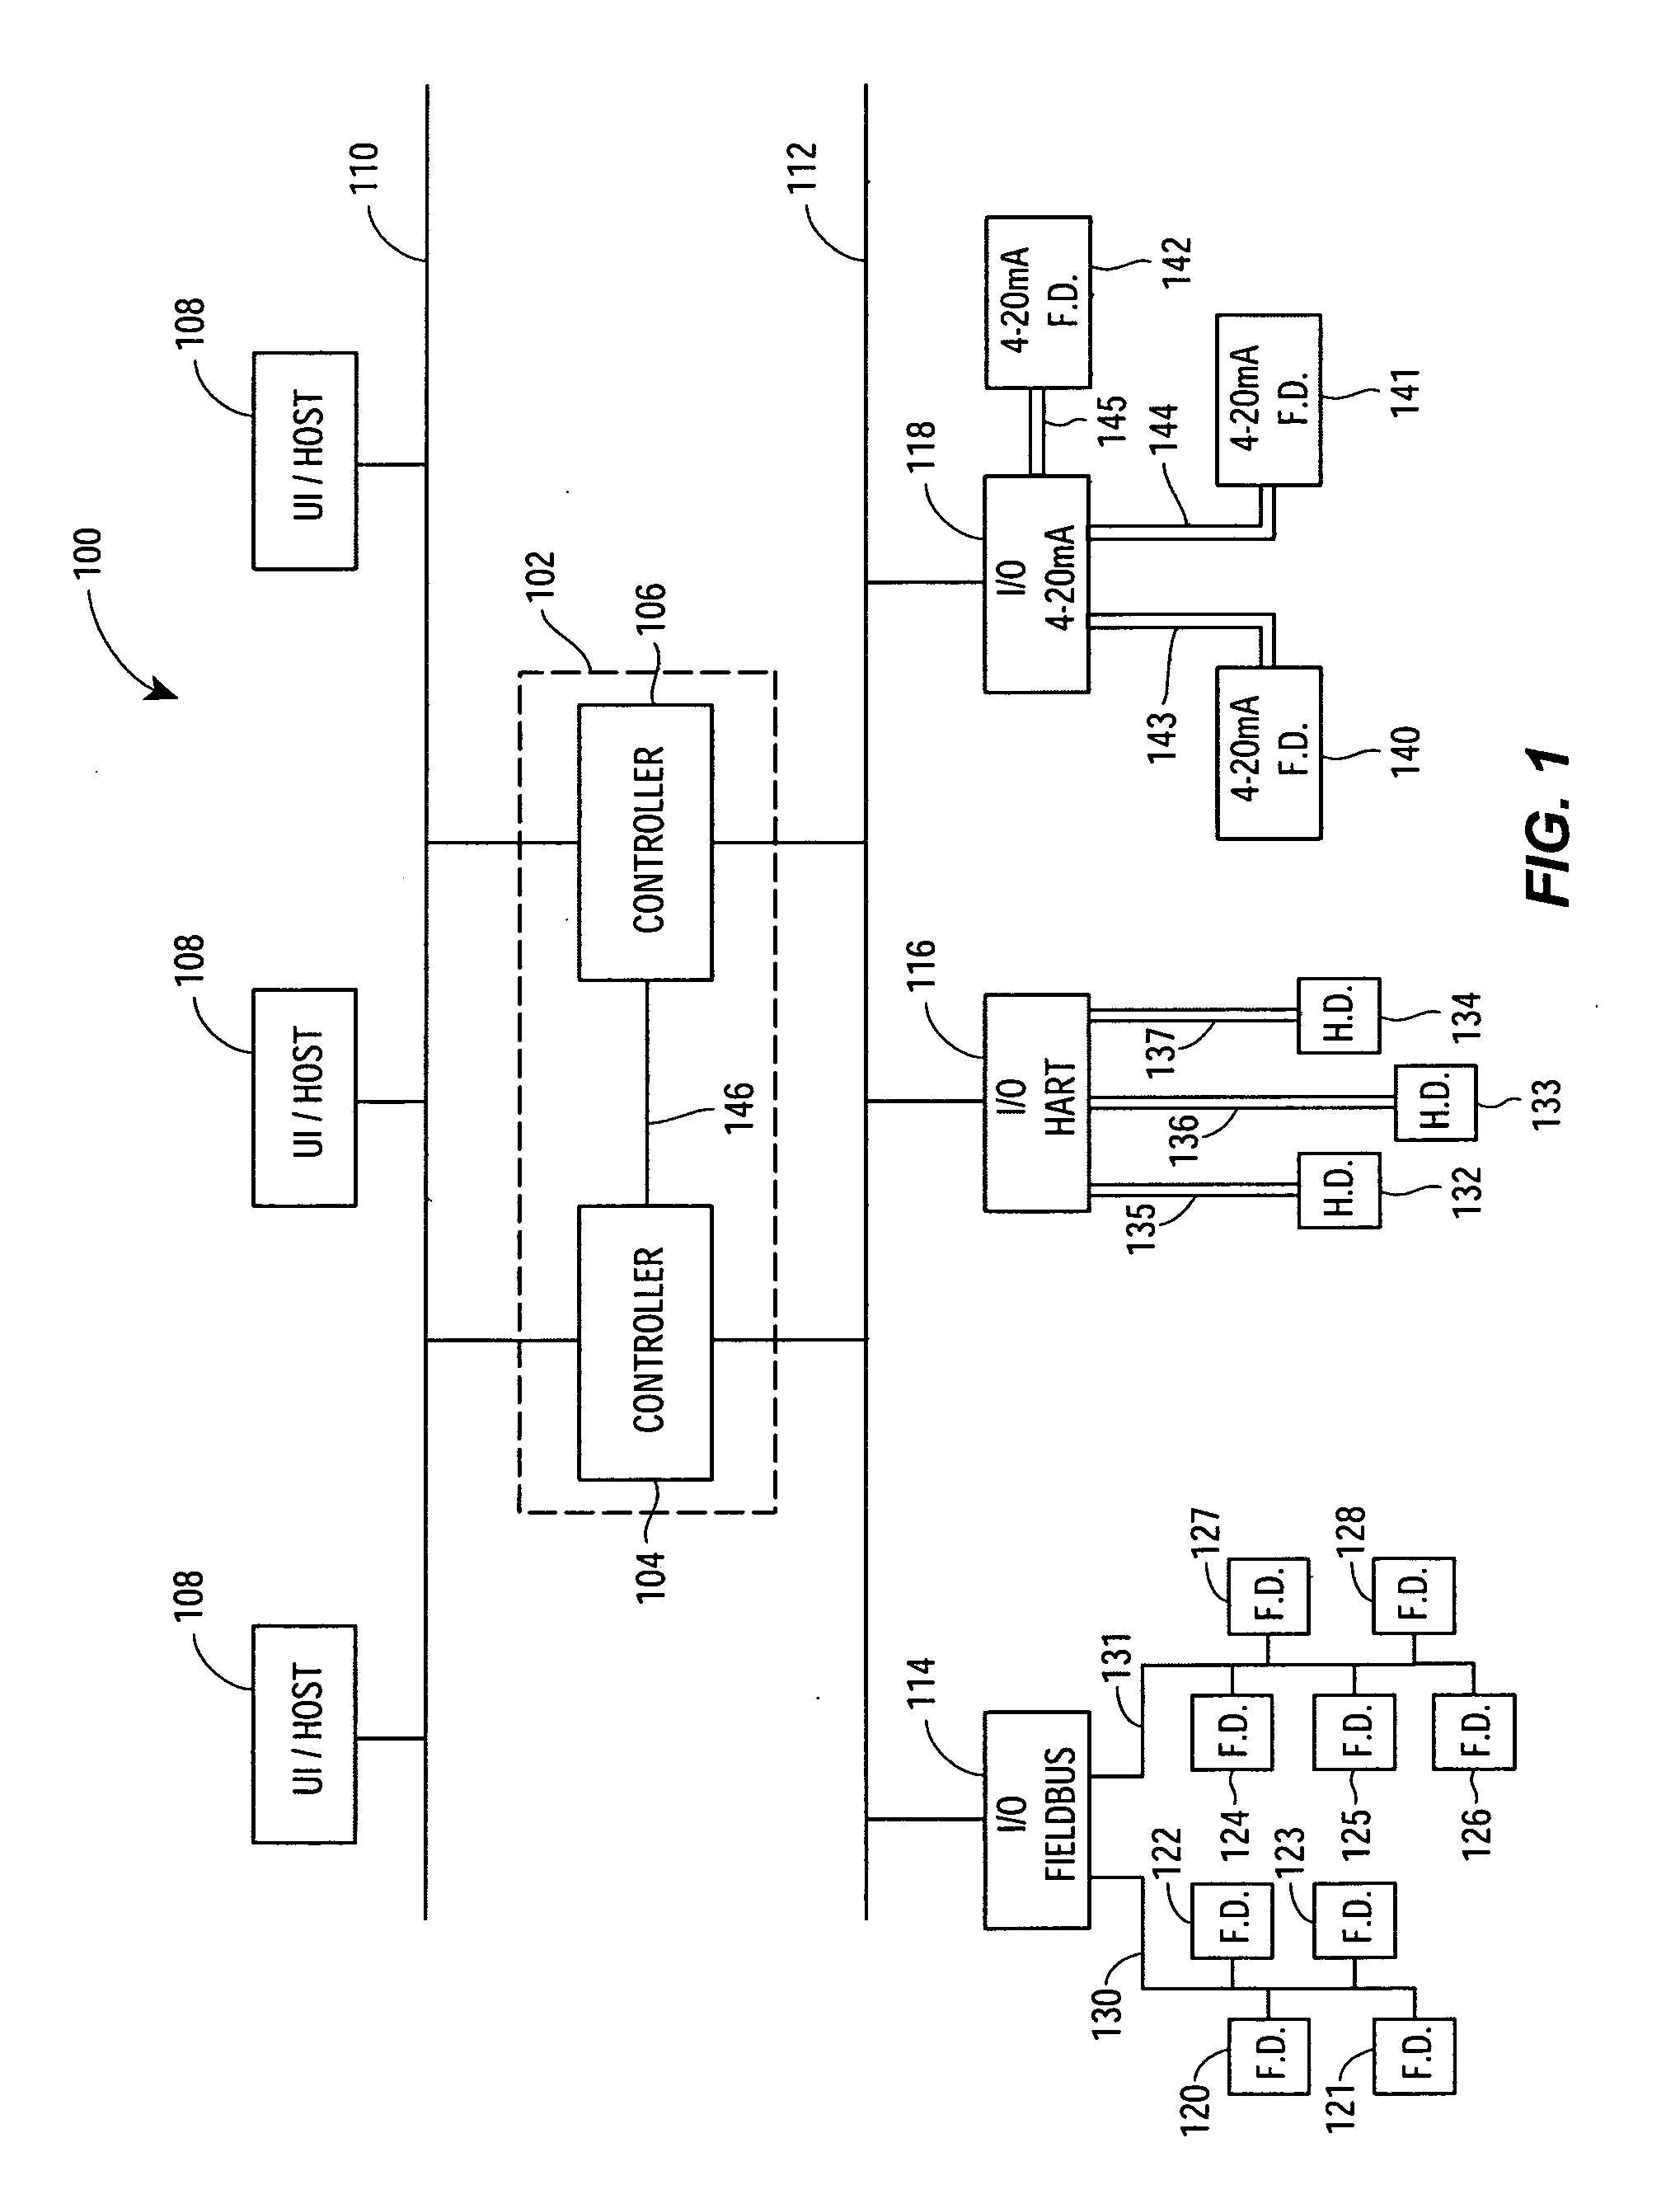 Method for redundant controller synchronization for bump-less failover during normal and program mismatch conditions